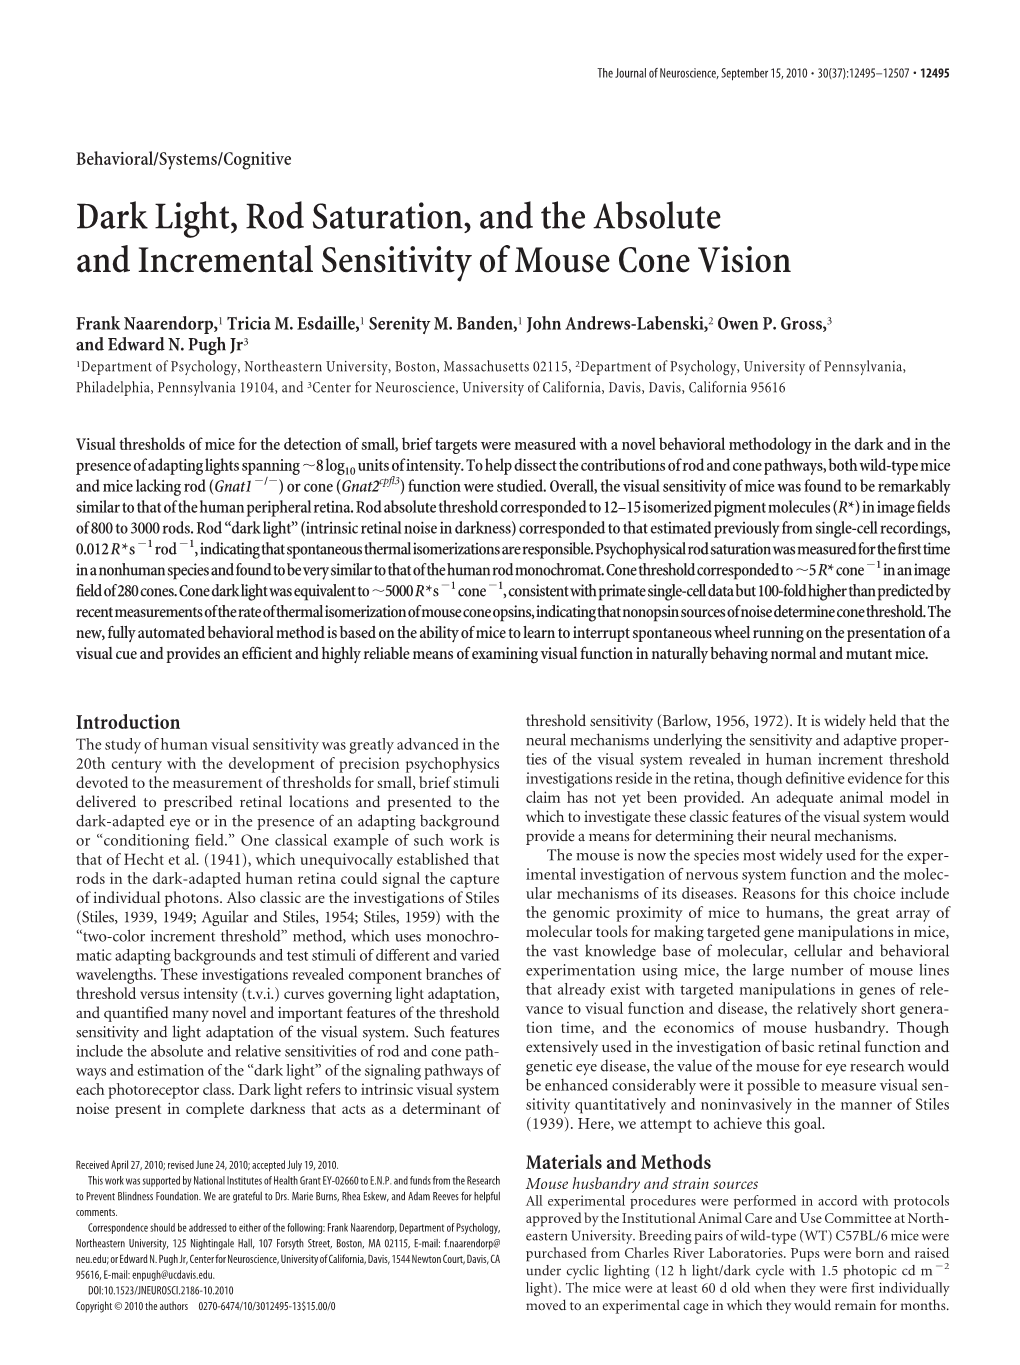 Dark Light, Rod Saturation, and the Absolute and Incremental Sensitivity of Mouse Cone Vision